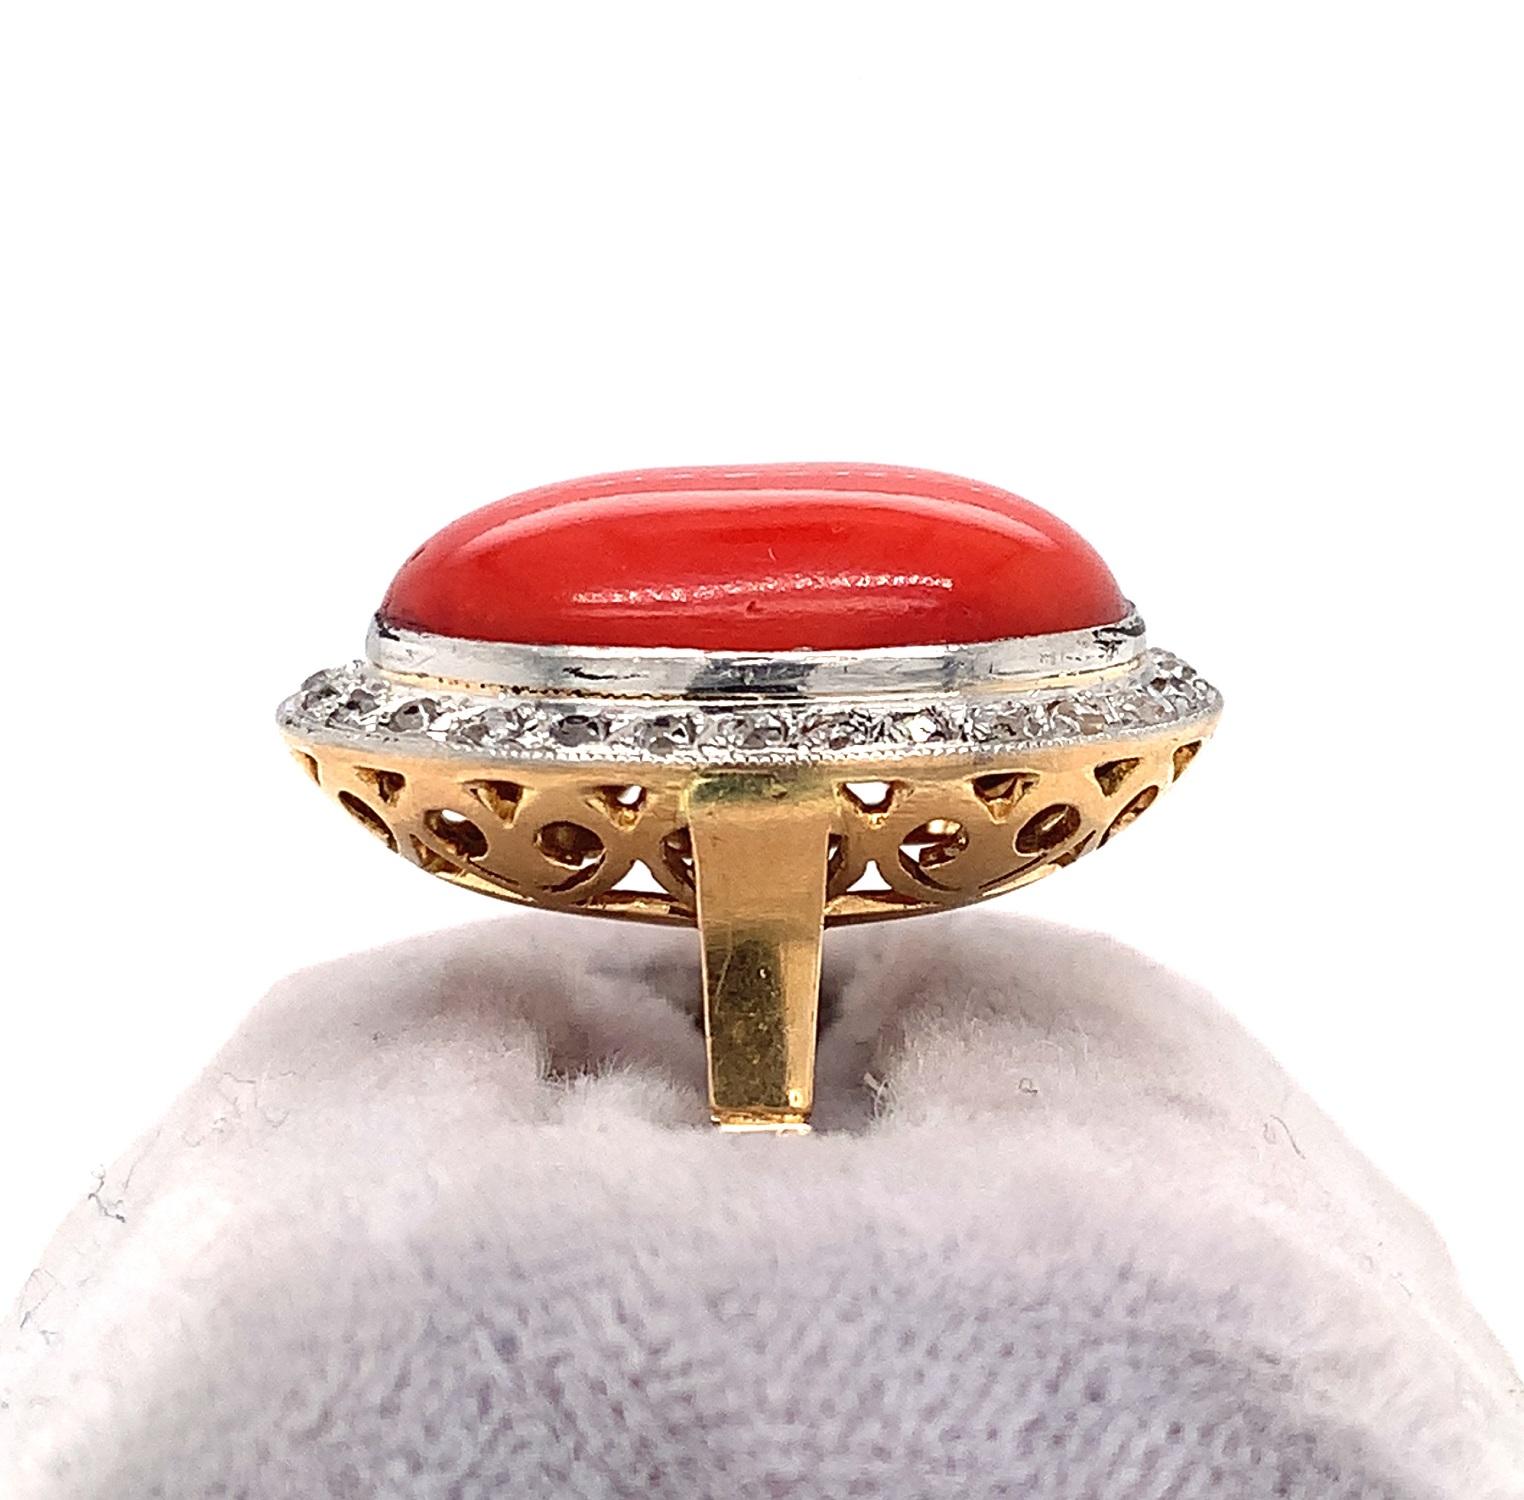 18K yellow gold with platinum top ring featuring a cabochon ox blood coral accented with a border of small polki/rough cut diamonds. The oval coral cabochon measures about 18.5mm x 12.5mm x 6mm and has a dark orangey-red color with a nice polish. 